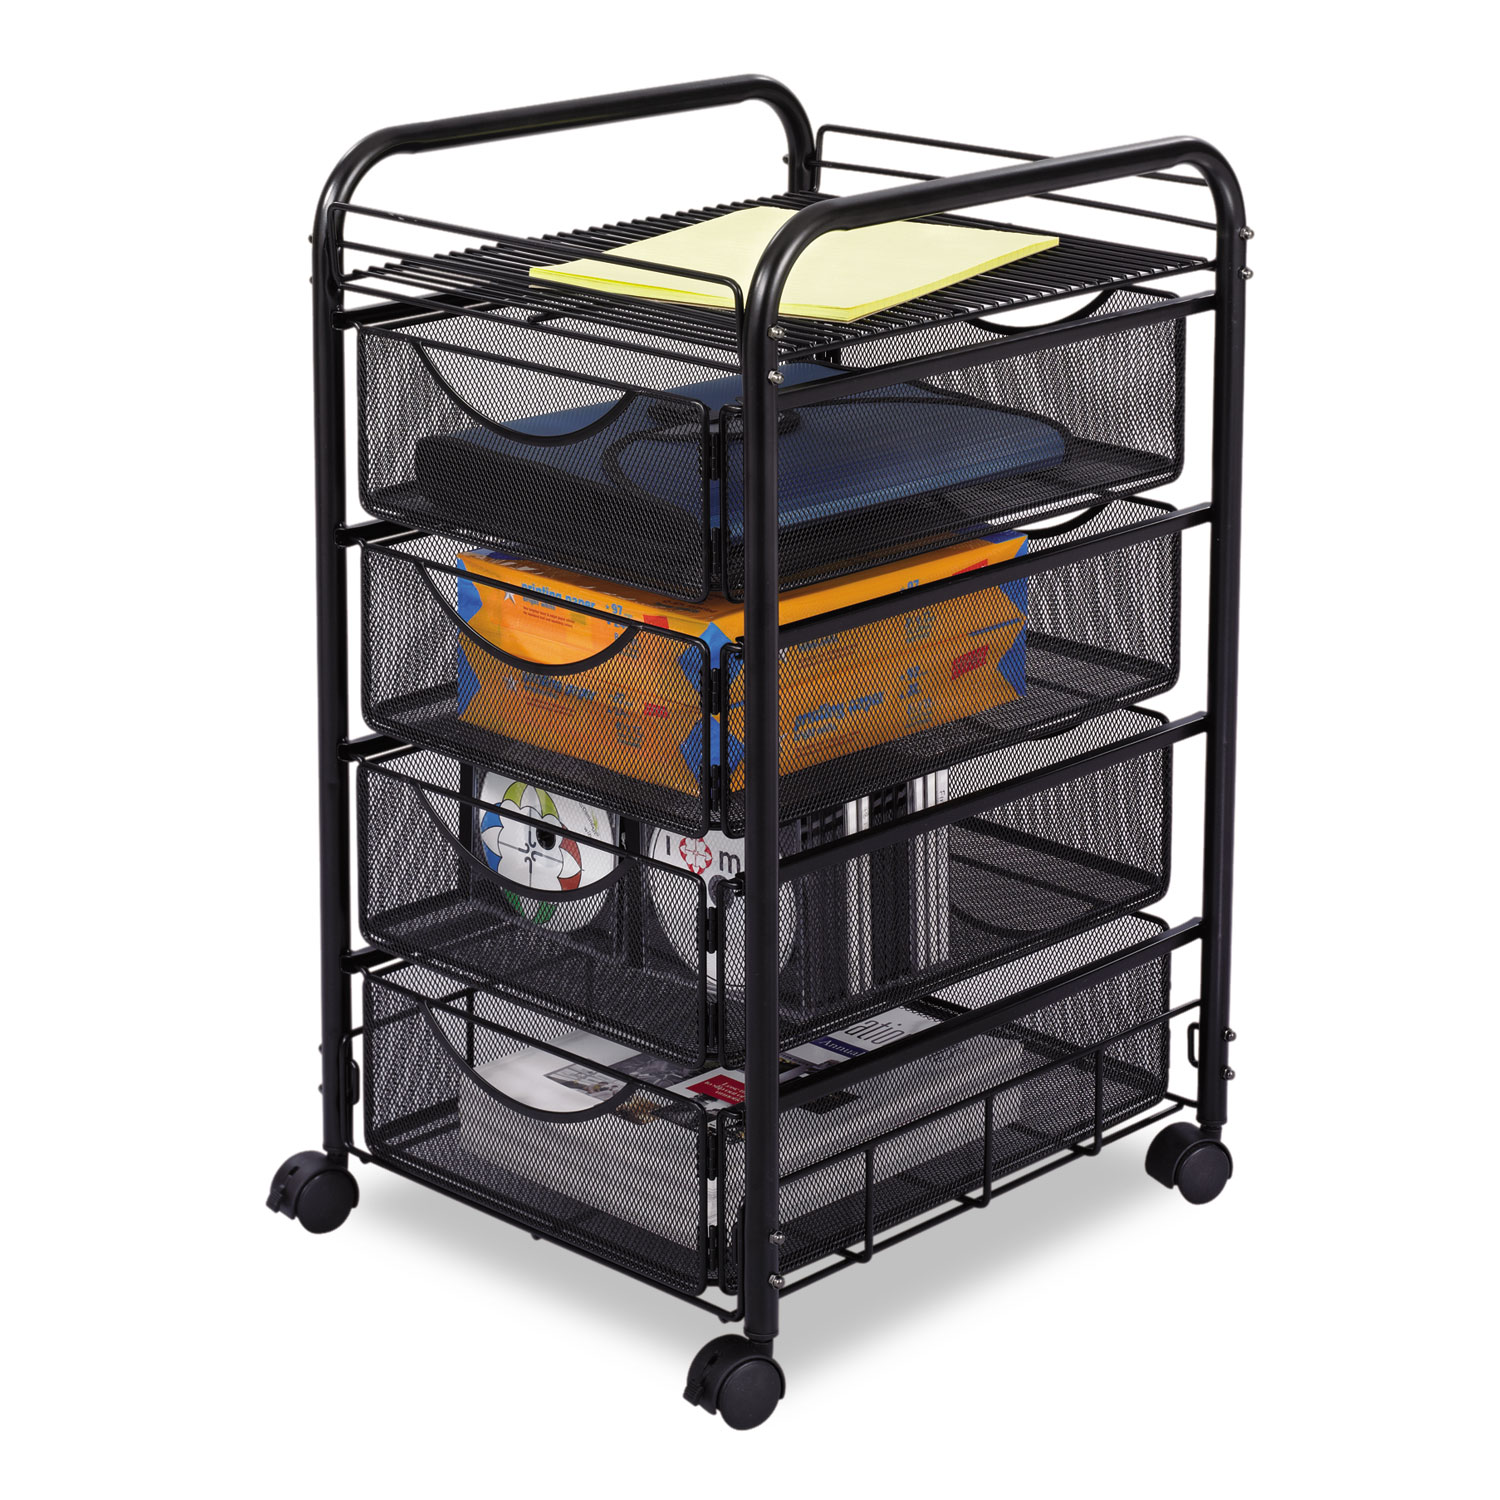  Safco 5214BL Onyx Mesh Mobile File With Four Supply Drawers, 15.75w x 17d x 27h, Black (SAF5214BL) 